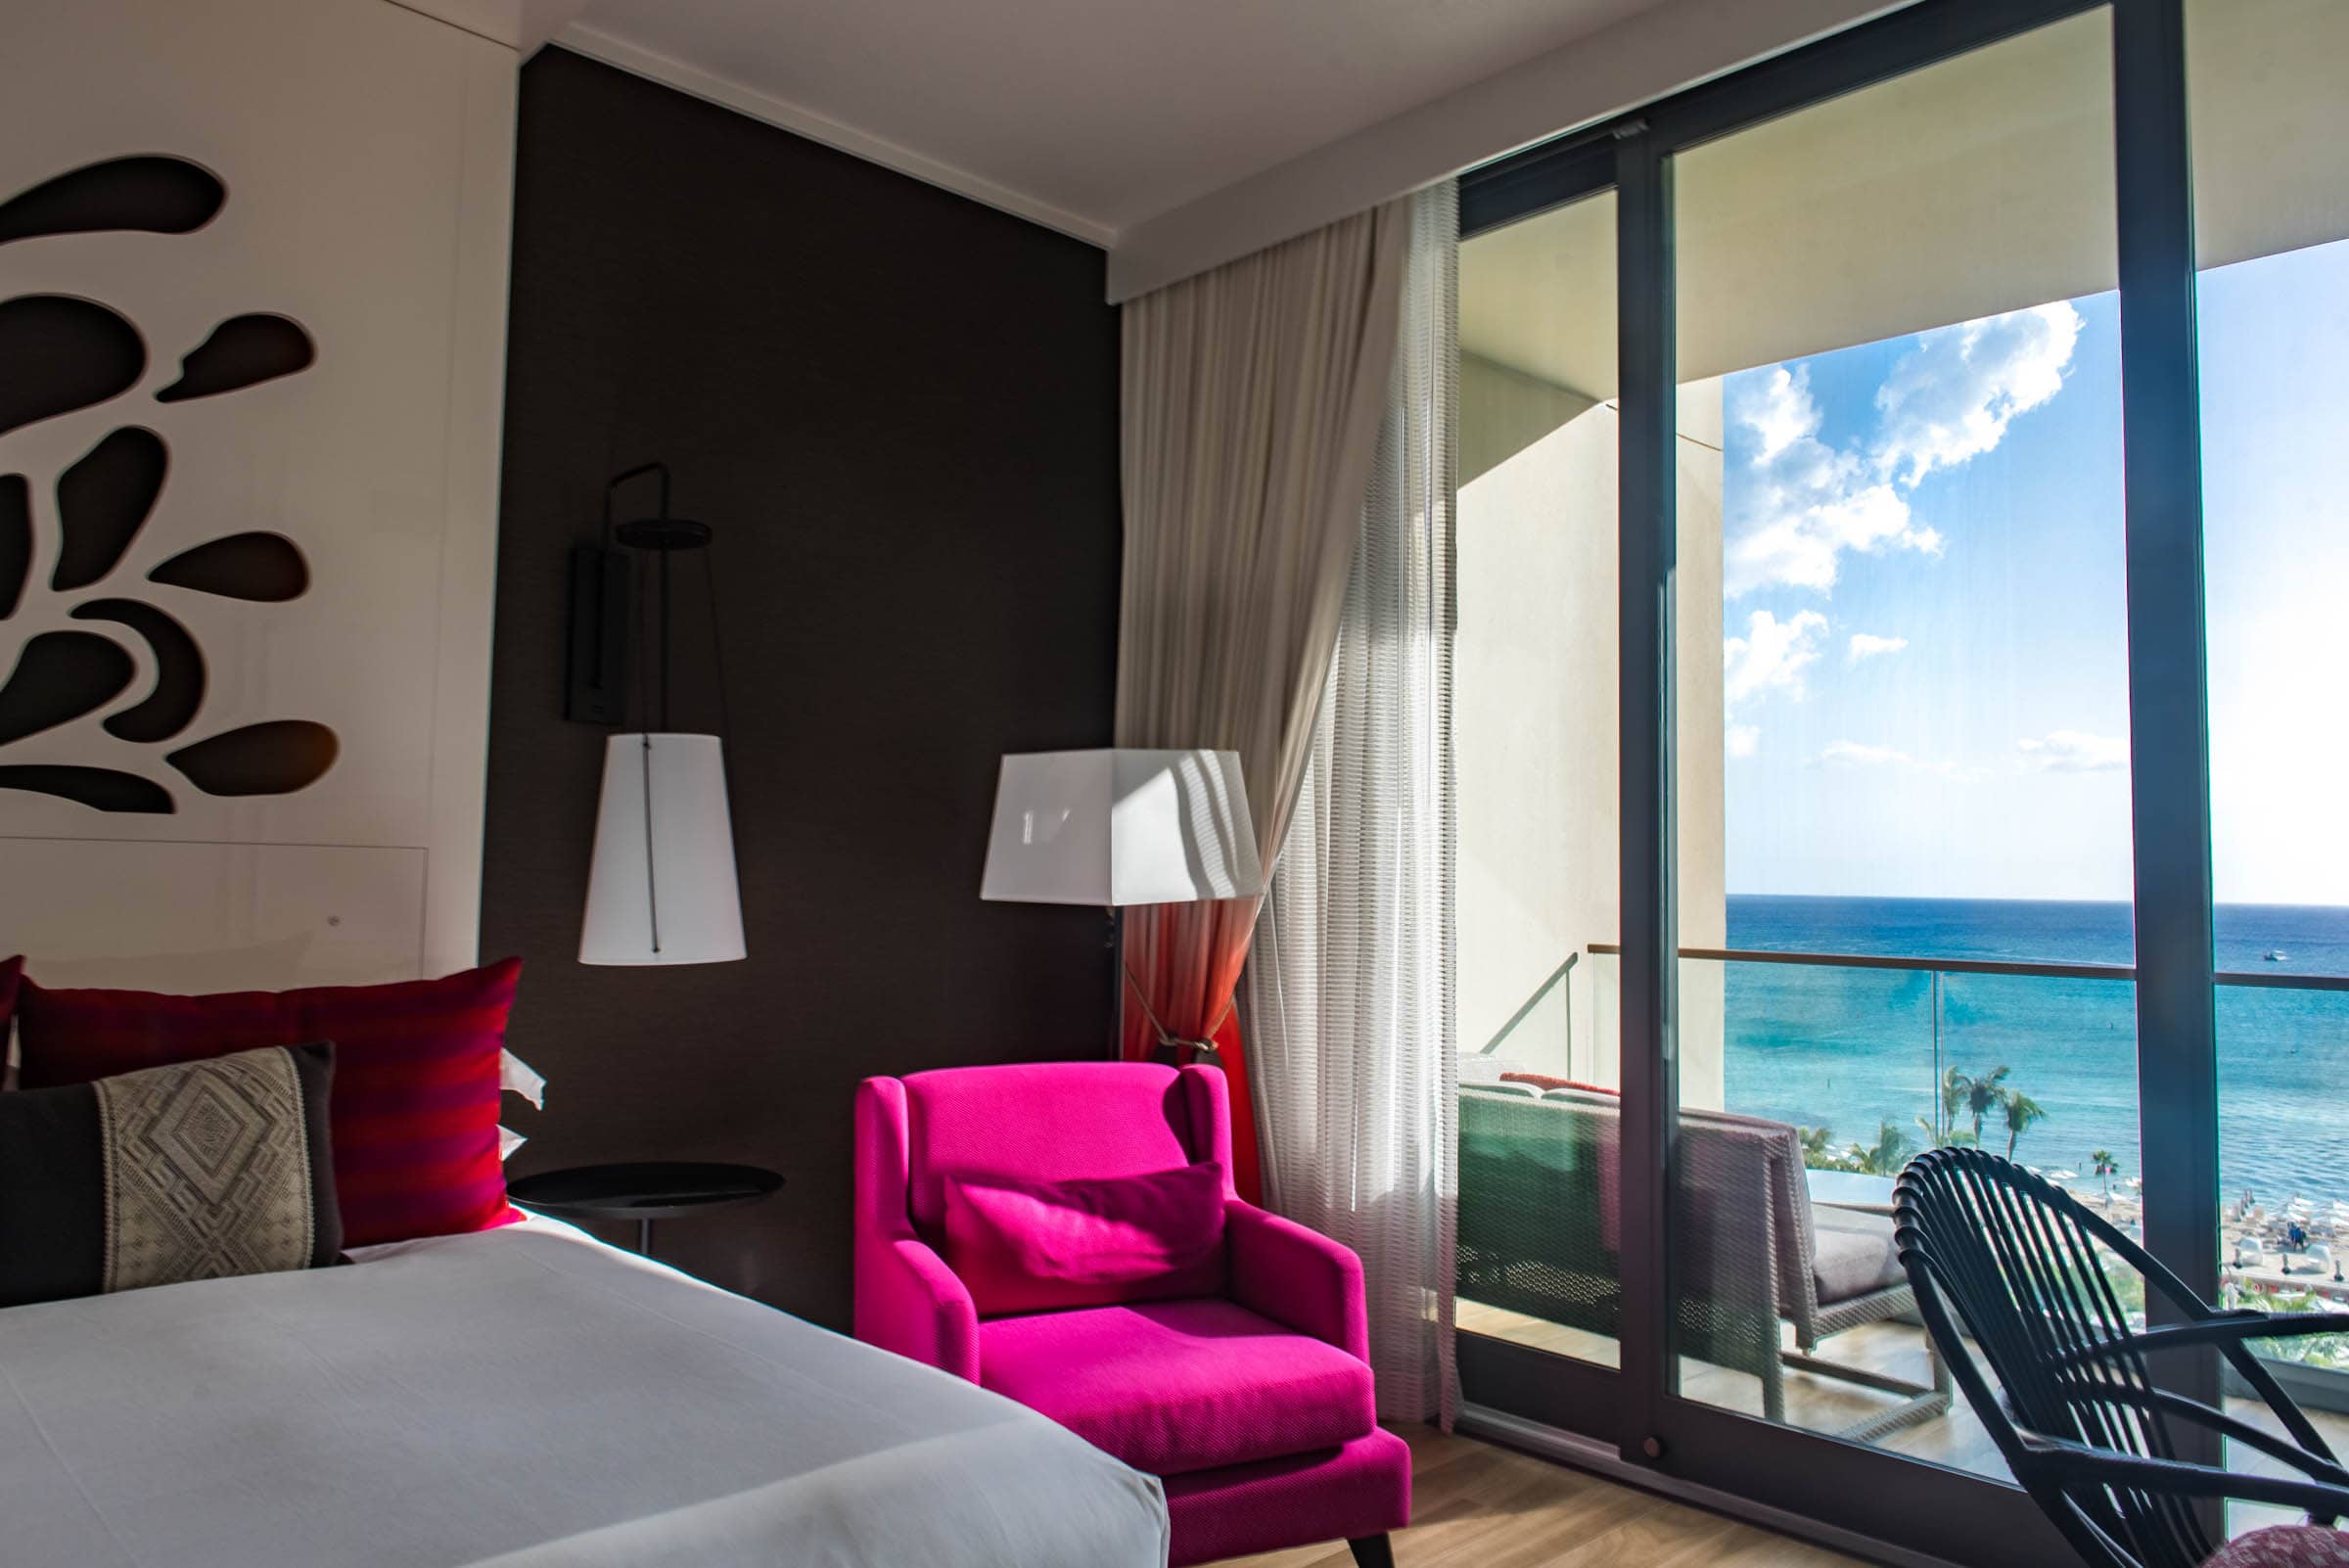 The rooms are modern, brightly accented, and feature huge windows.